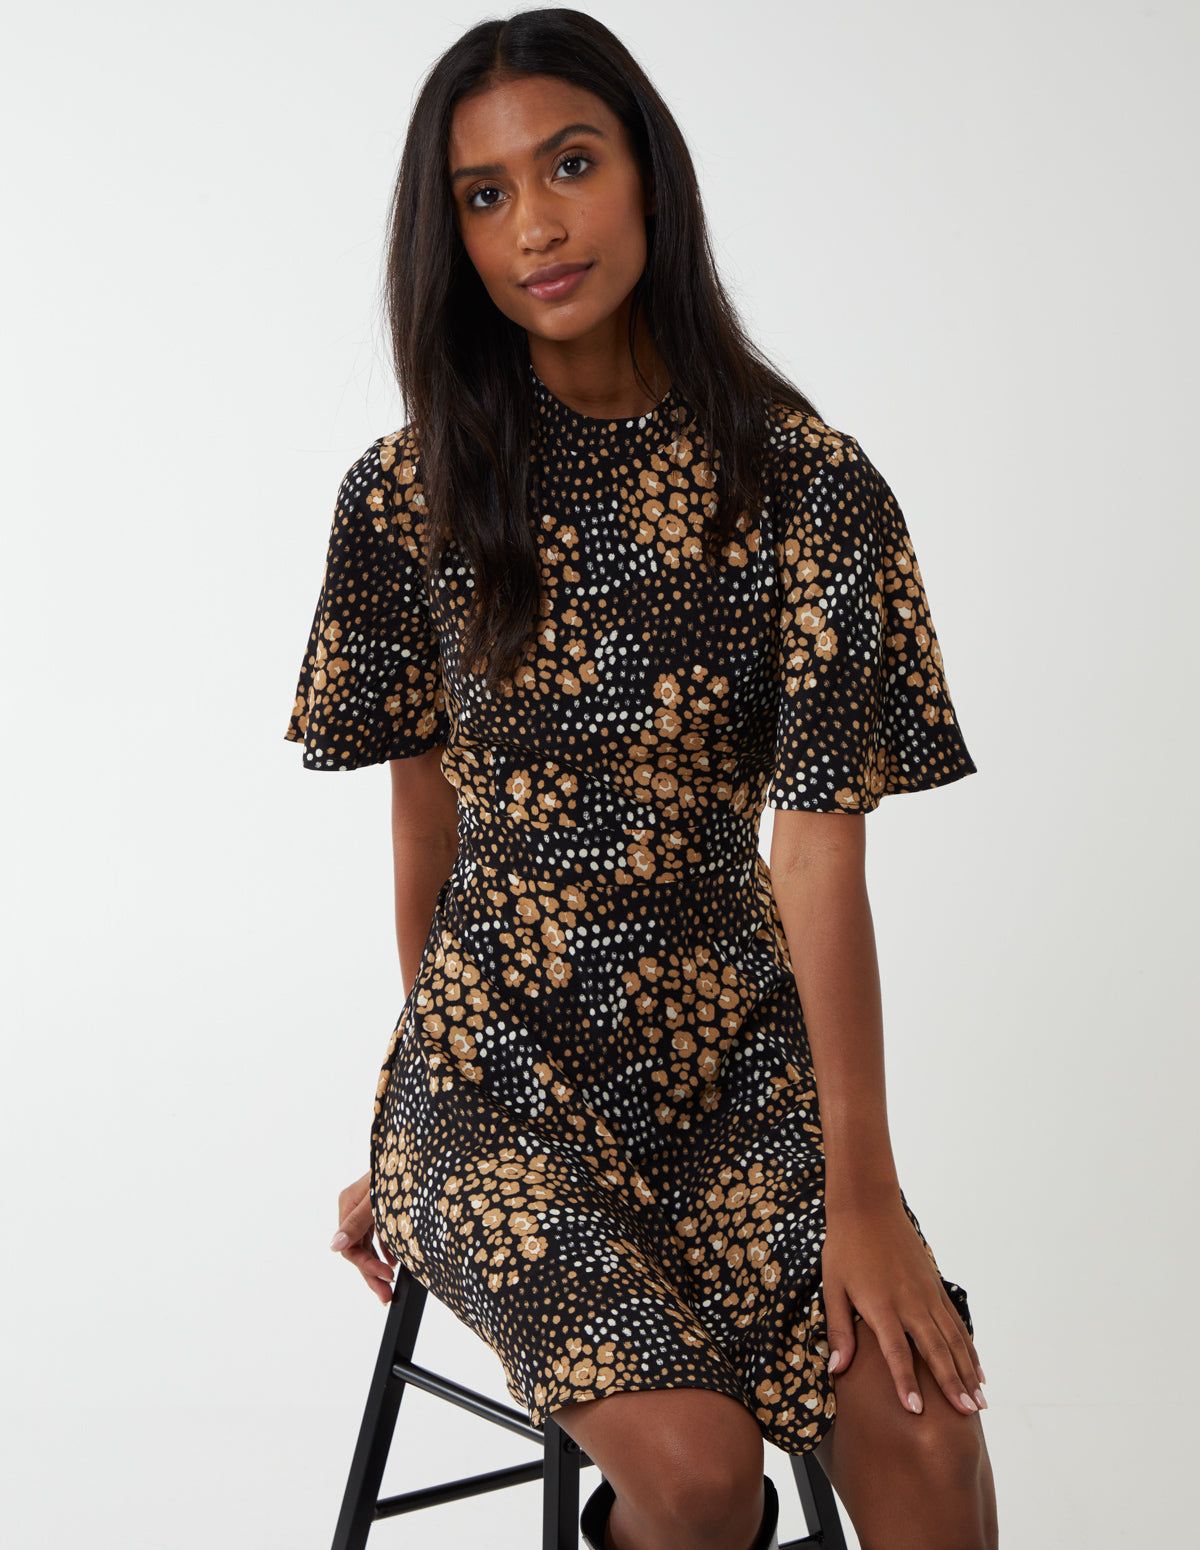 We have the perfect dress for you to wear at fancy dinner party or a night out with your friends. It has angel sleeves, an adorable floral print, a high neckline and it looks great with block heel shoes!